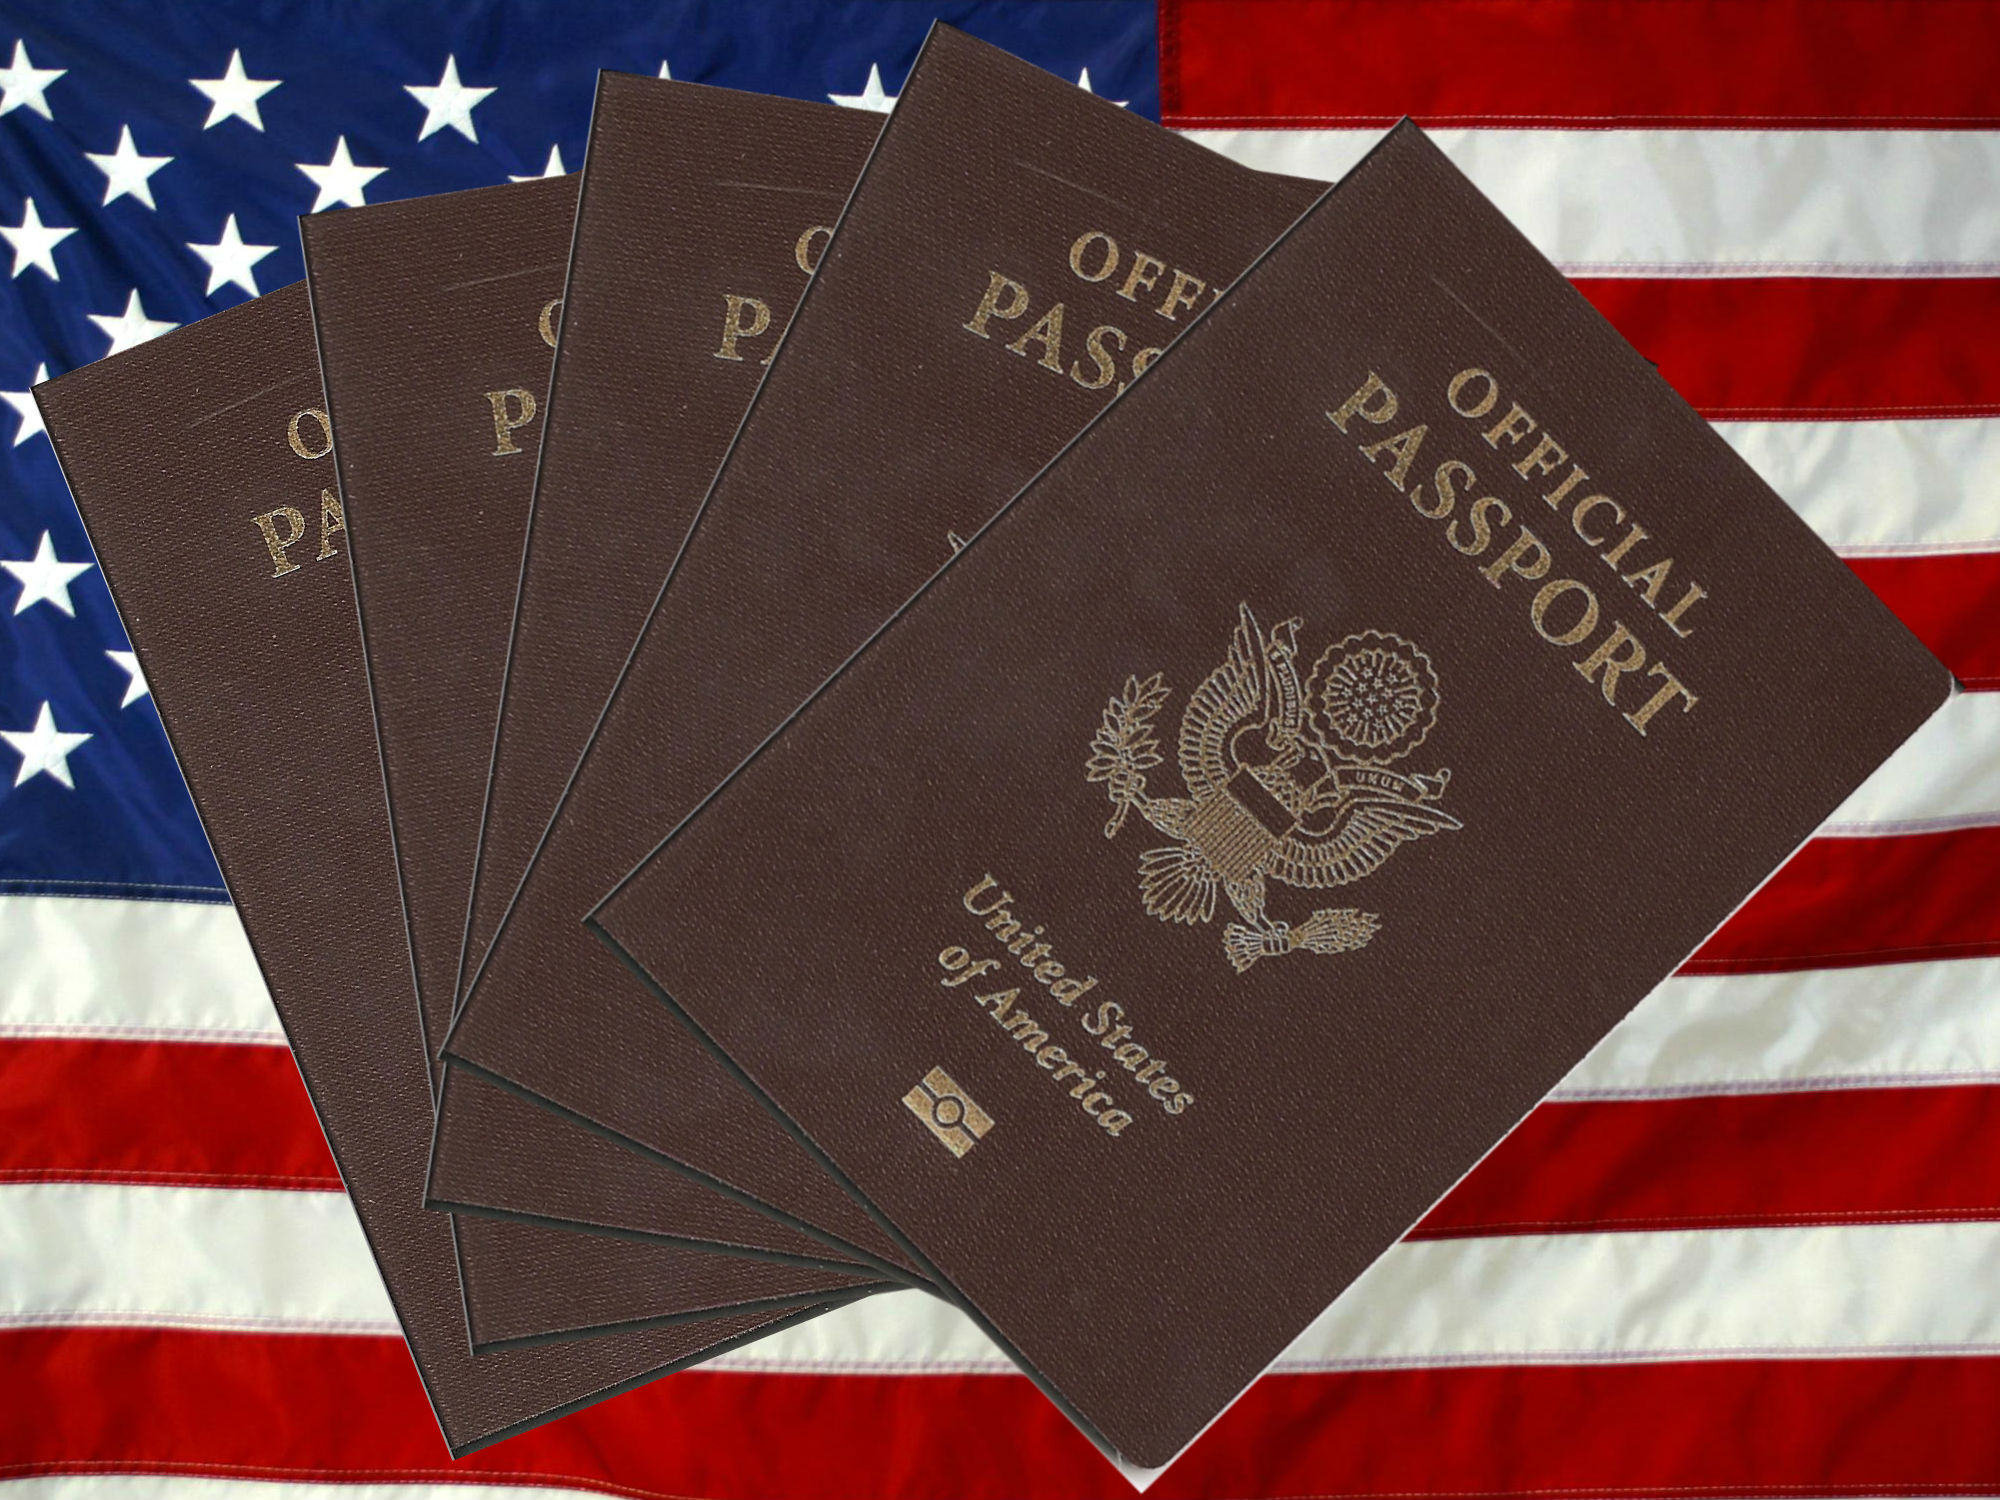 Types of Passports Issued in USA 24 Hour Passport & Visas